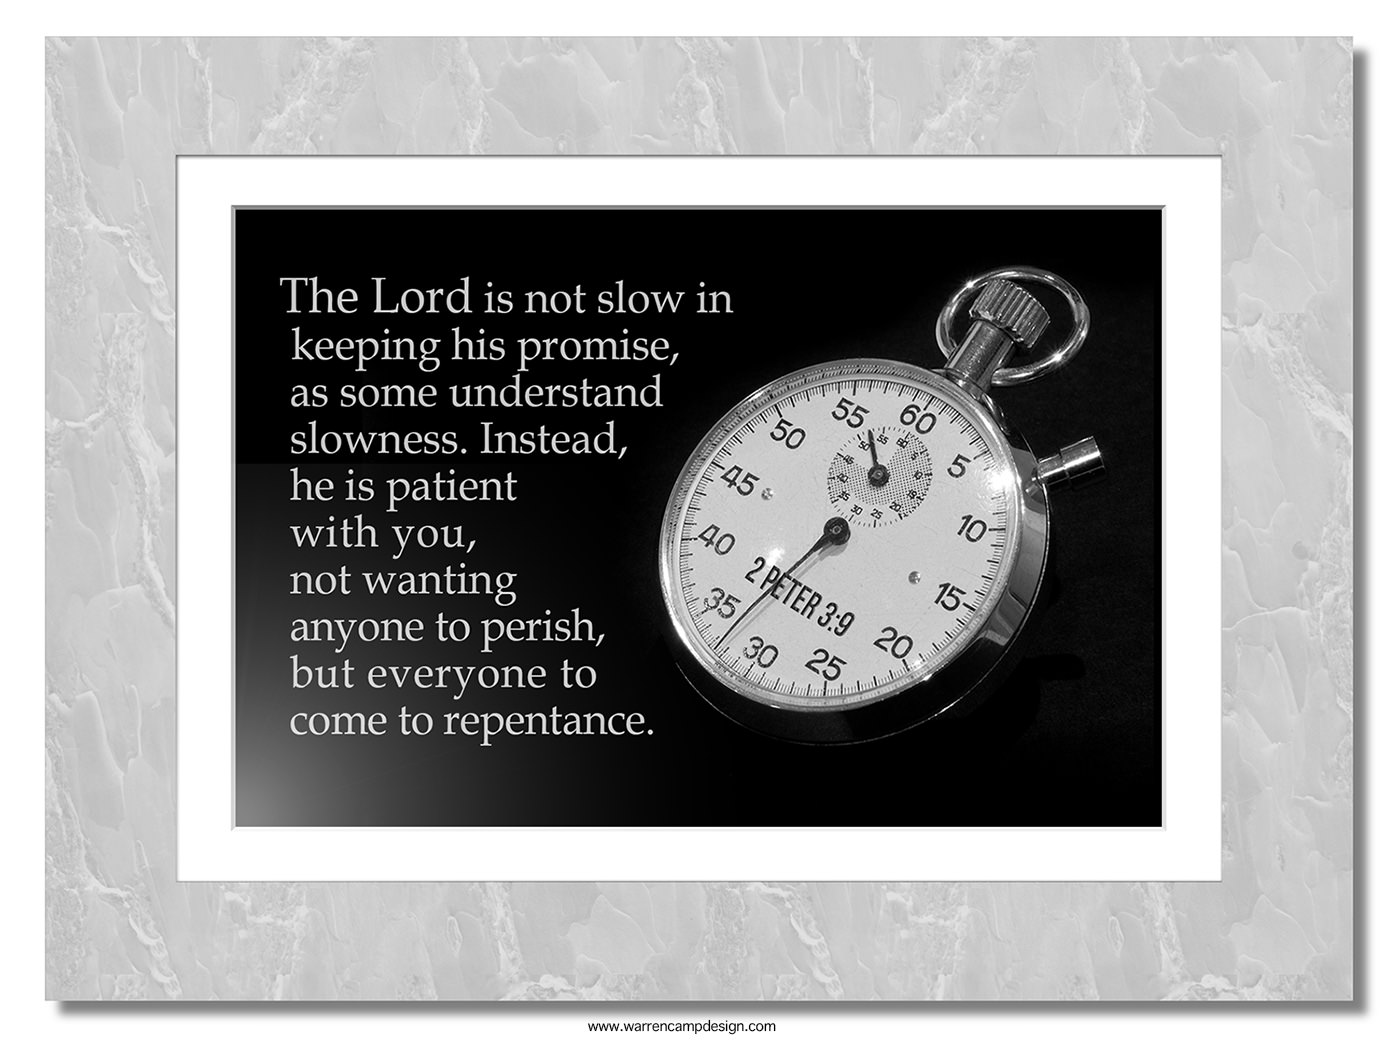 Scripture picture of 2nd Peter 3:9, emphasizing the importance of God's patience as he encourages everyone's repentance